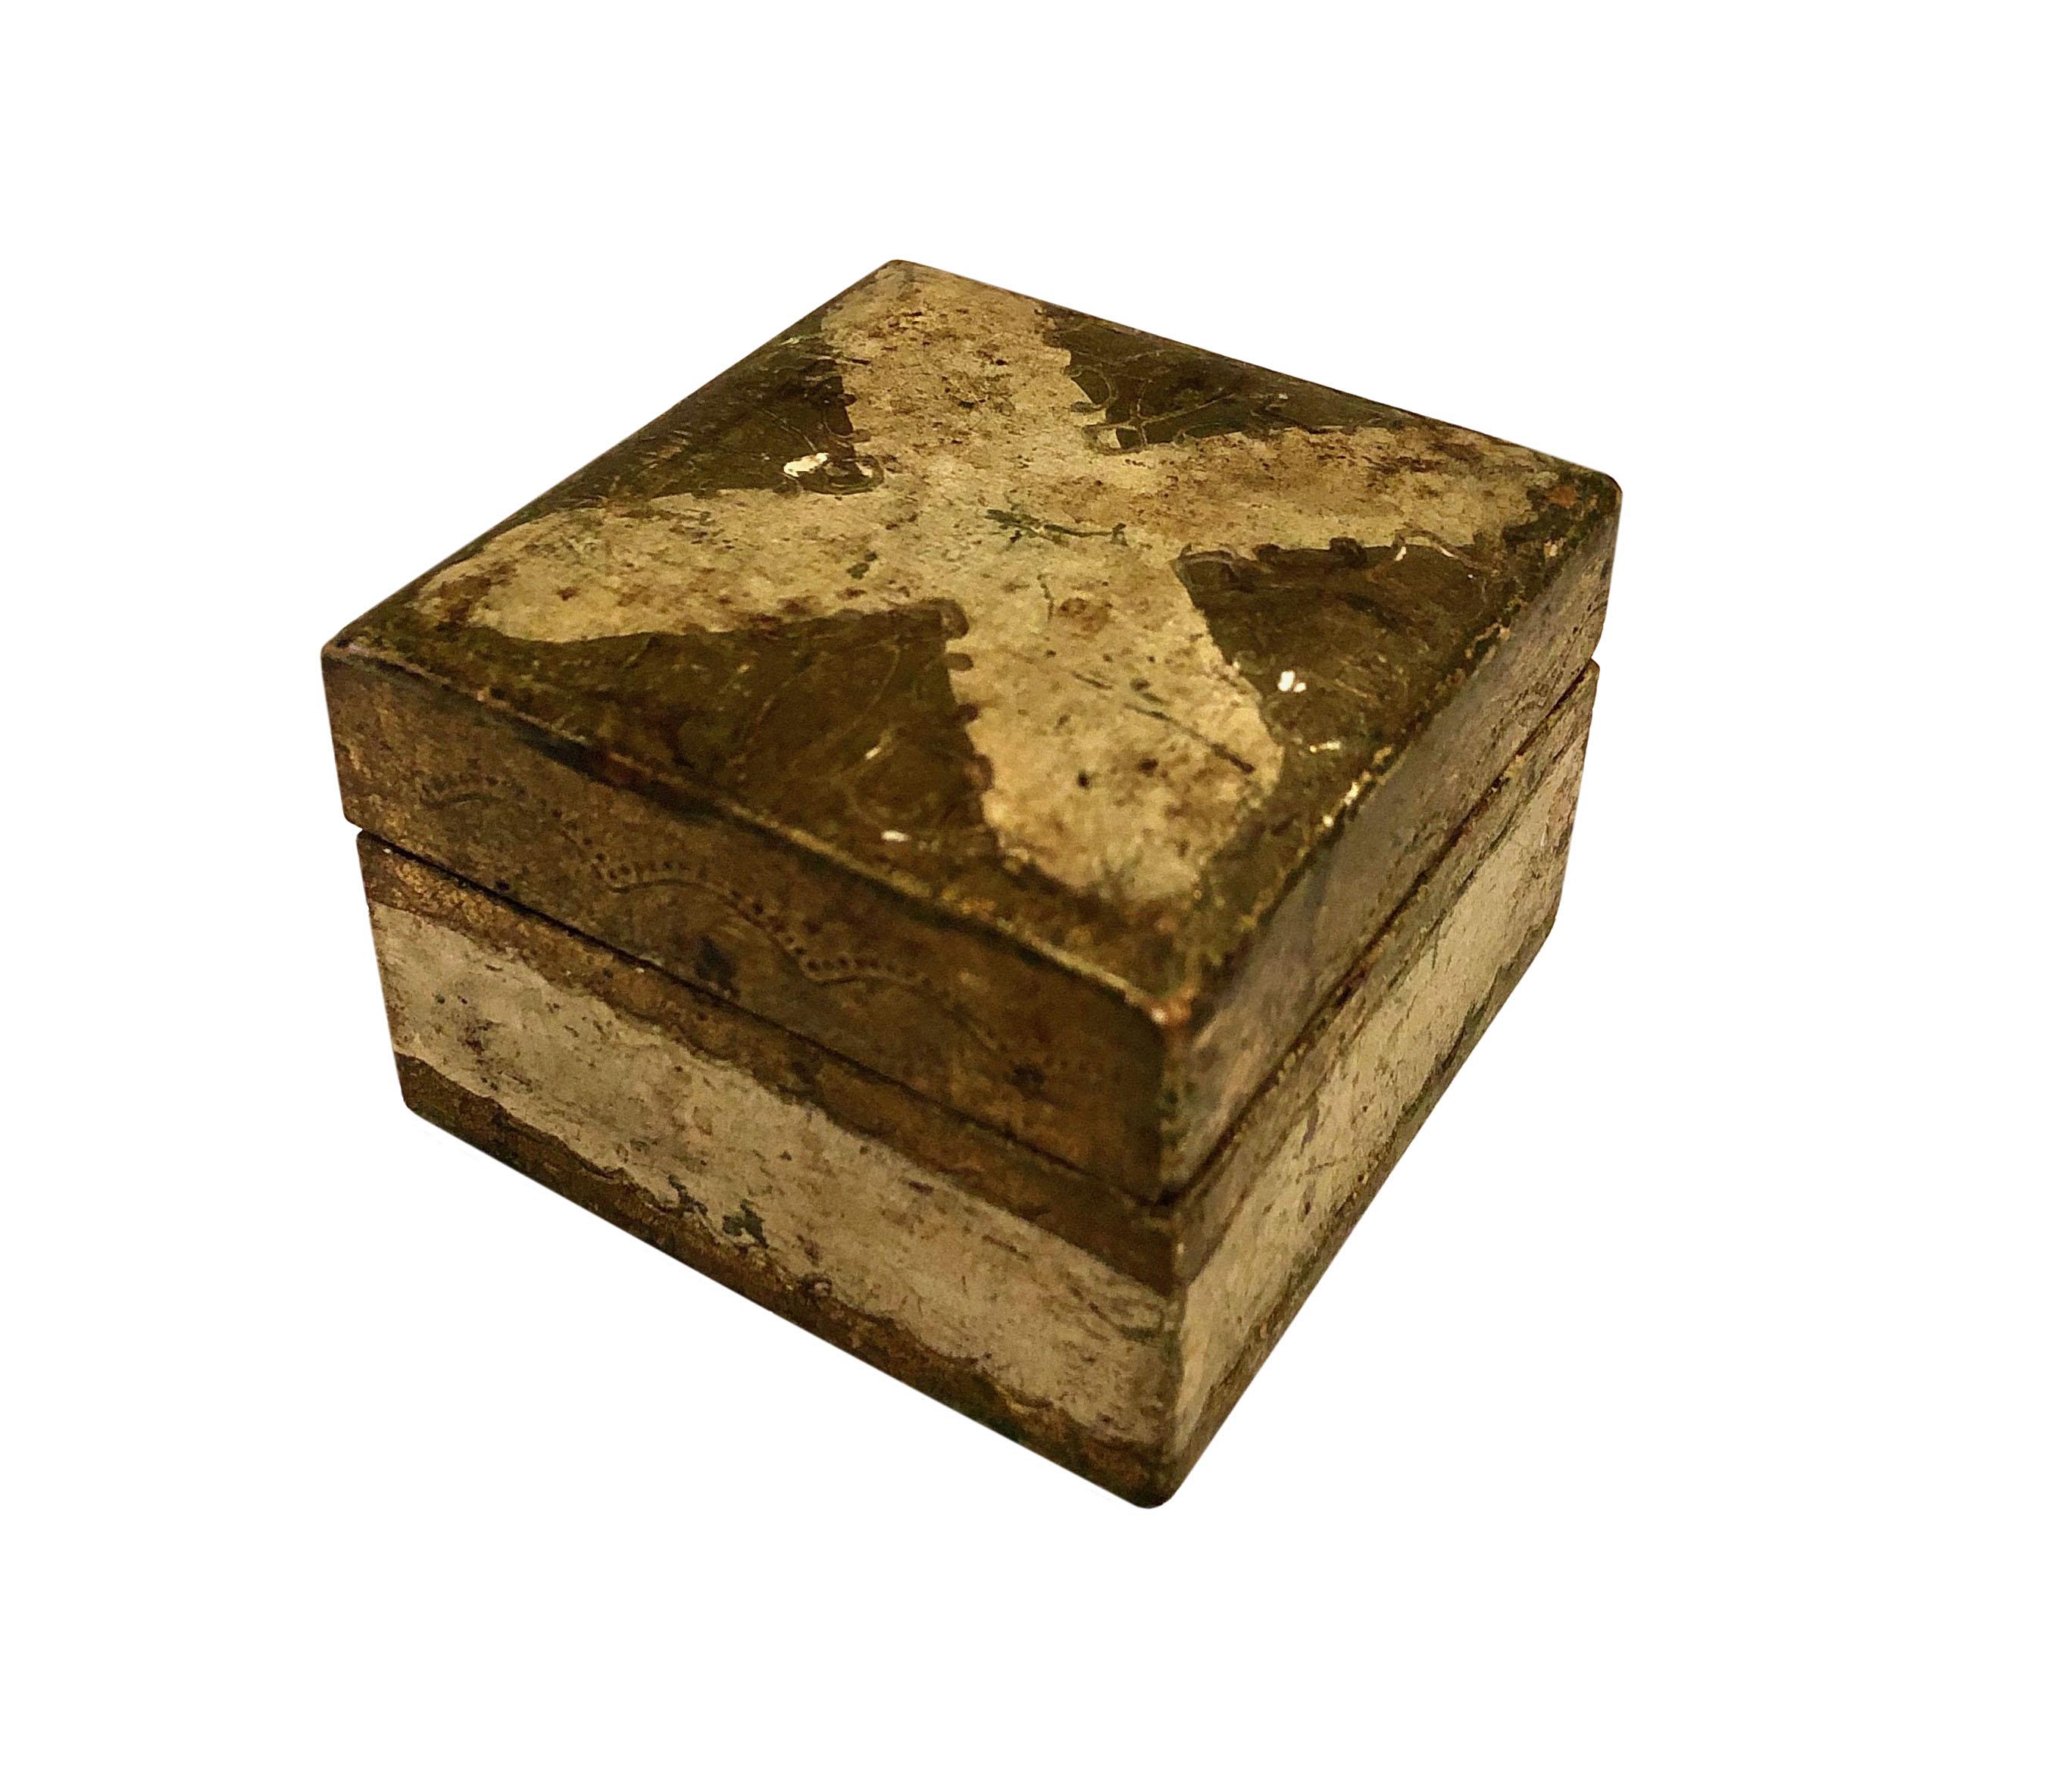 A small turn of the century Italian Florentine box with an X design on top.